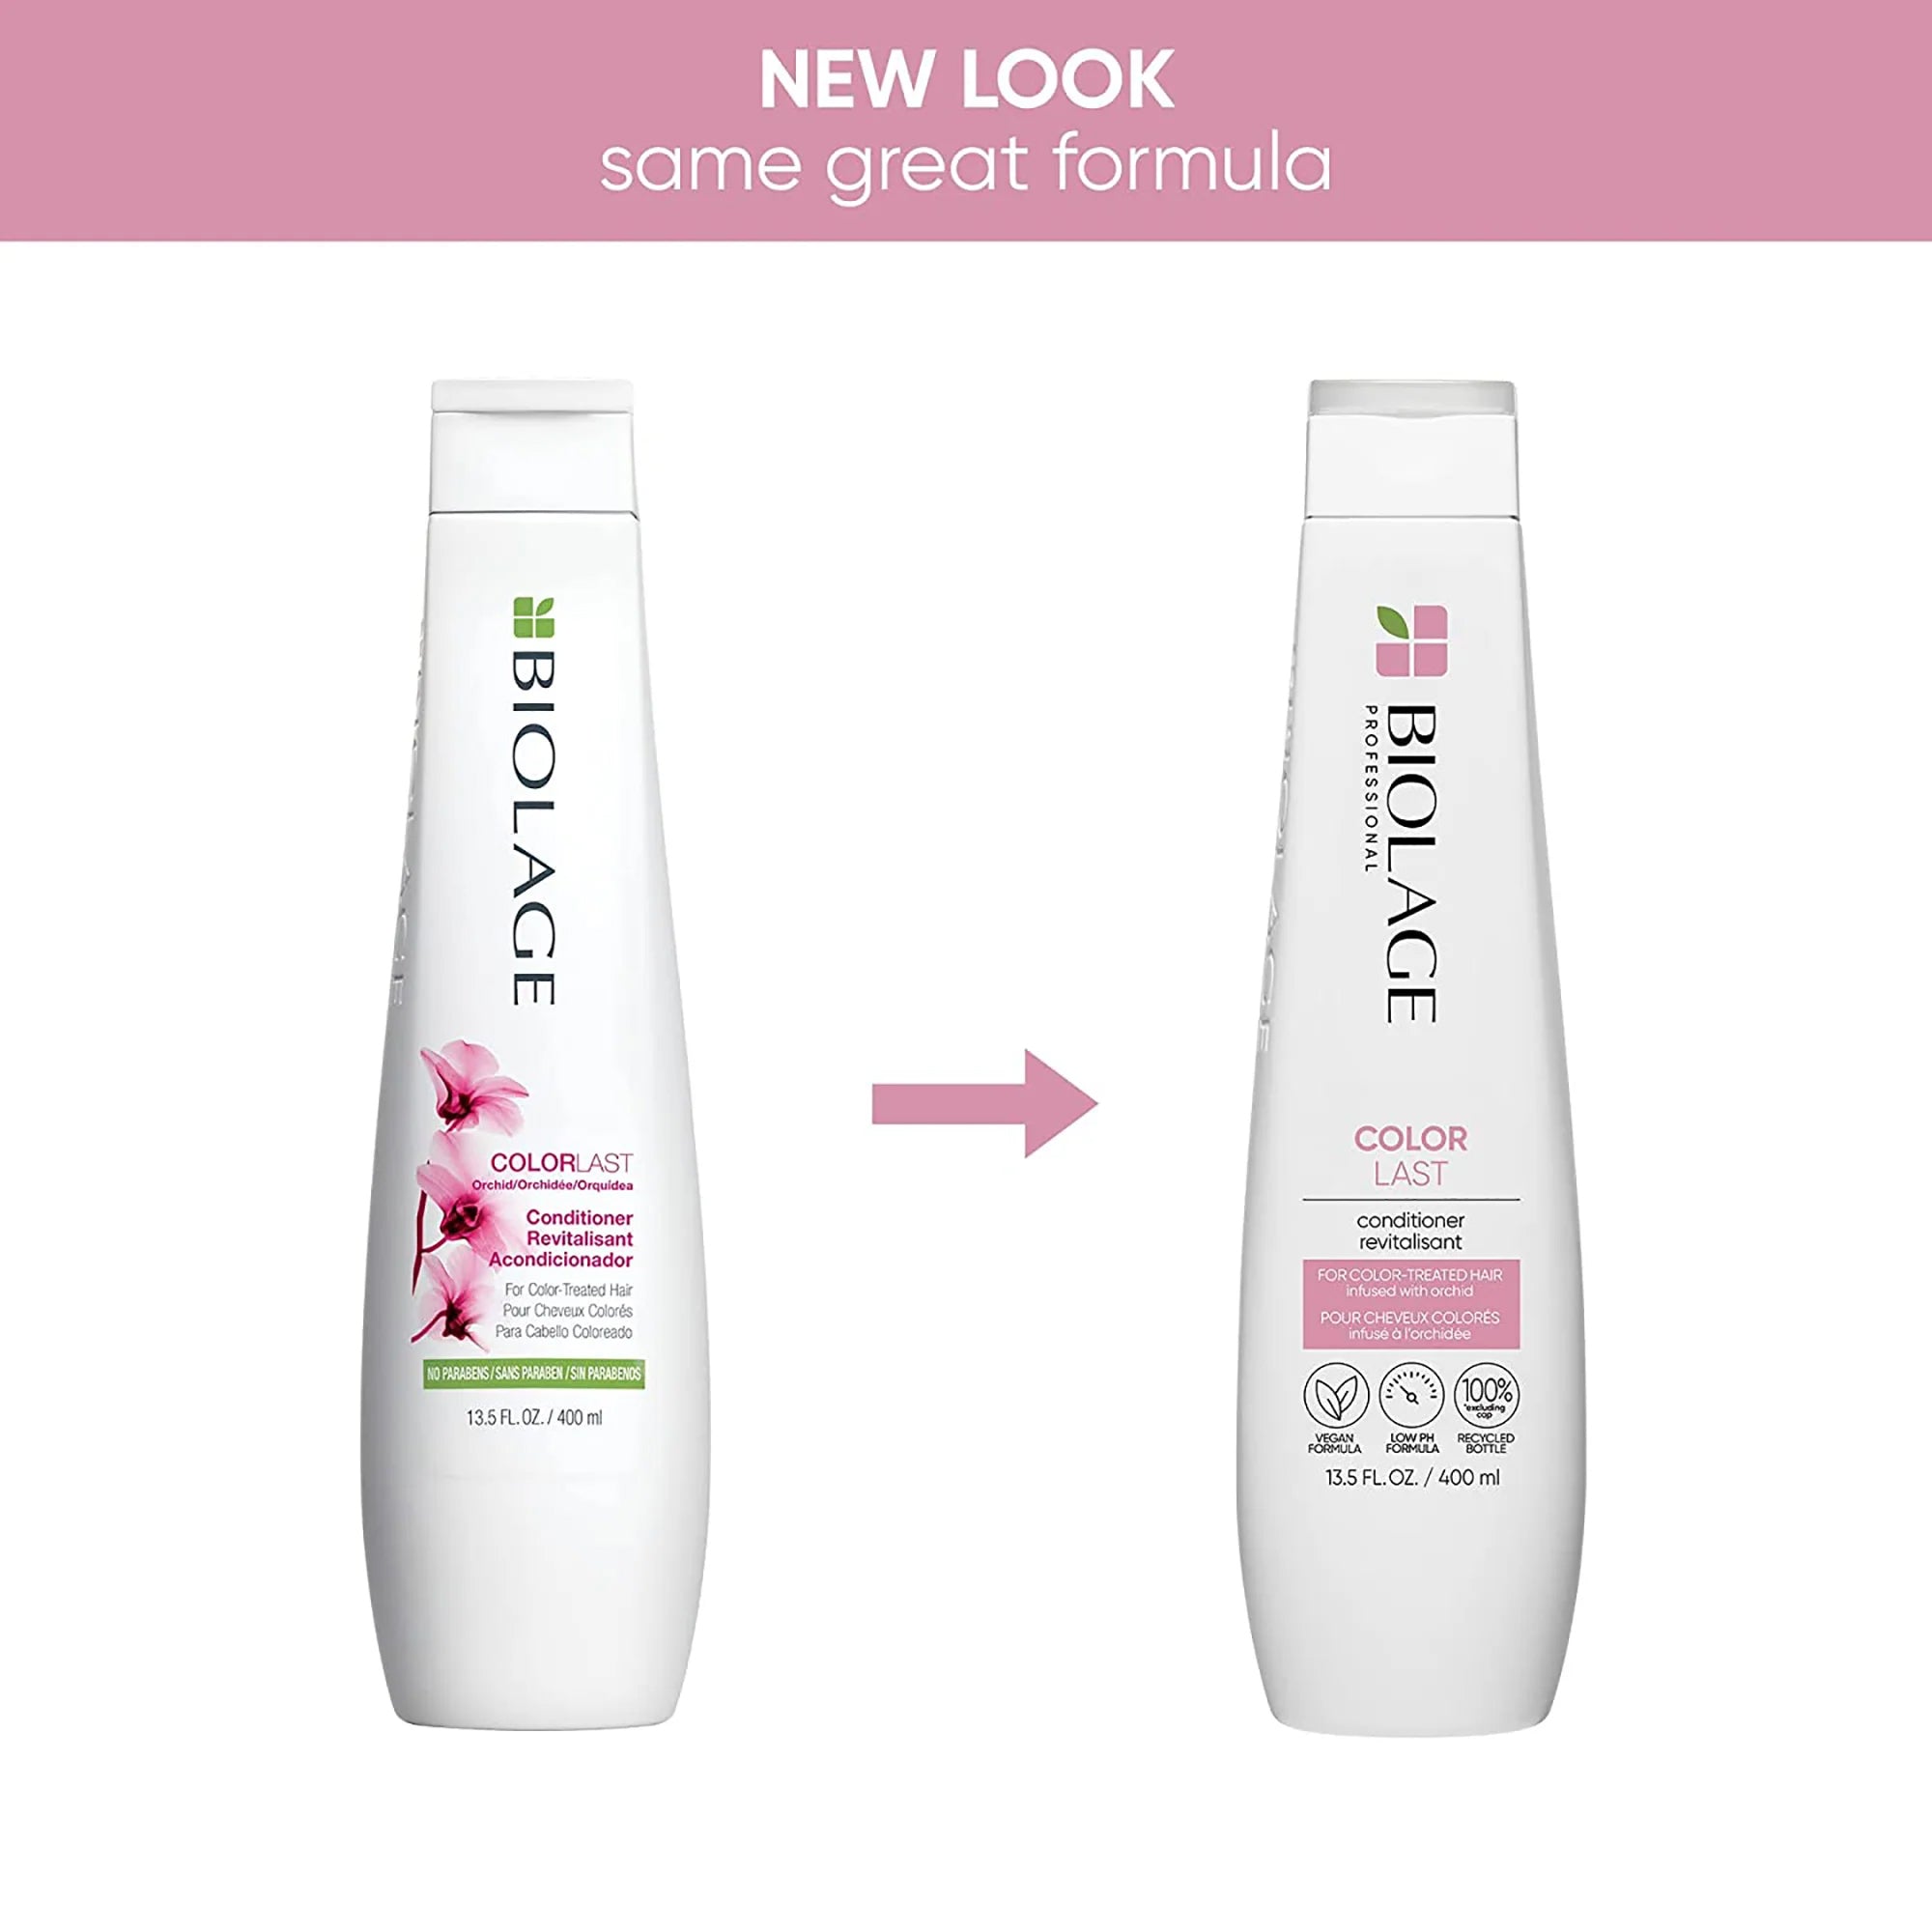 Biolage Coloarlast new packaging